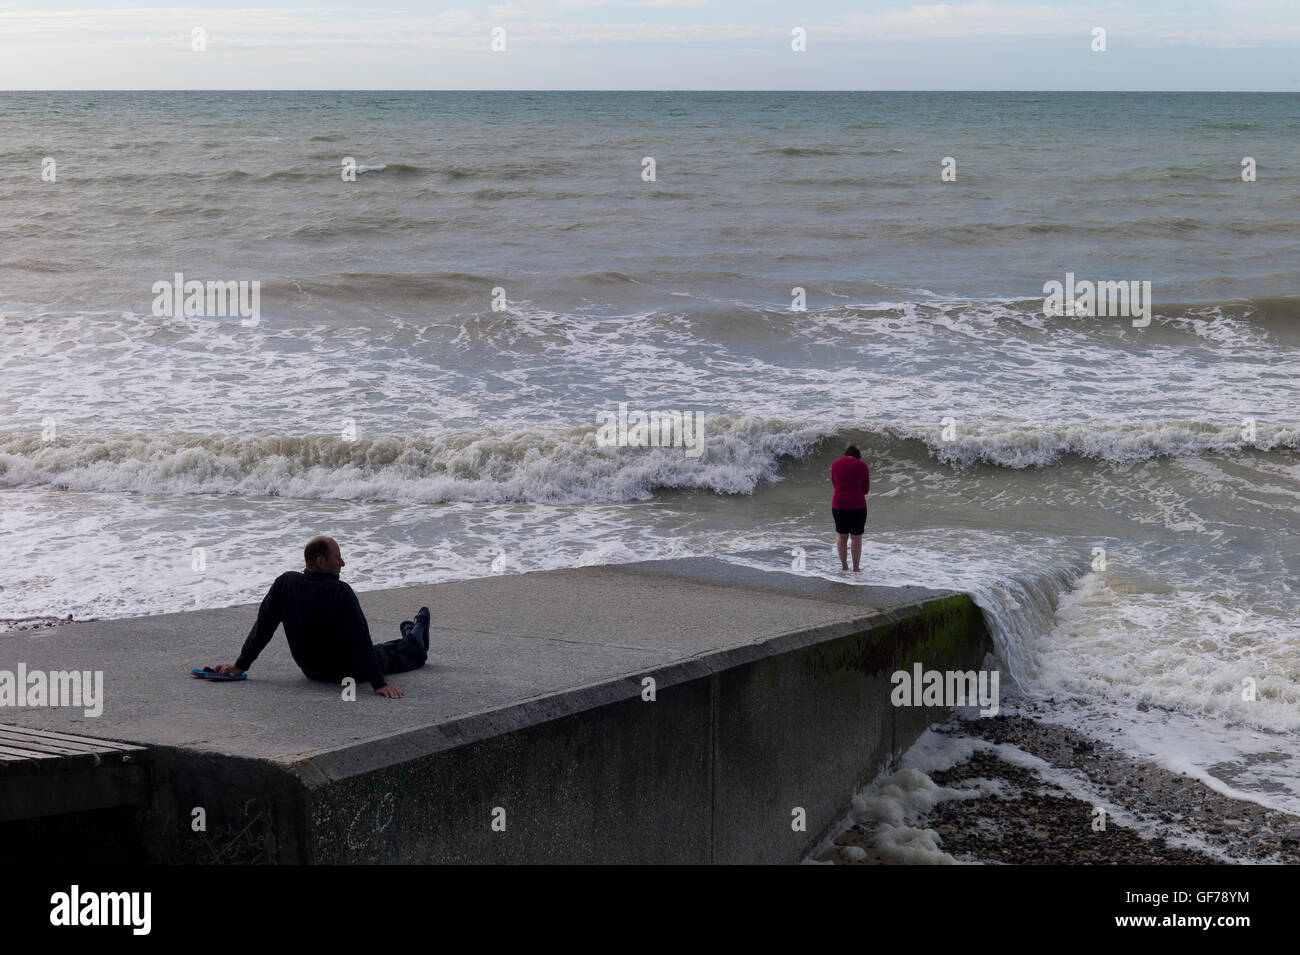 Man sitting on a breakwater watching his wife paddle in the sea, Normandy,France Stock Photo